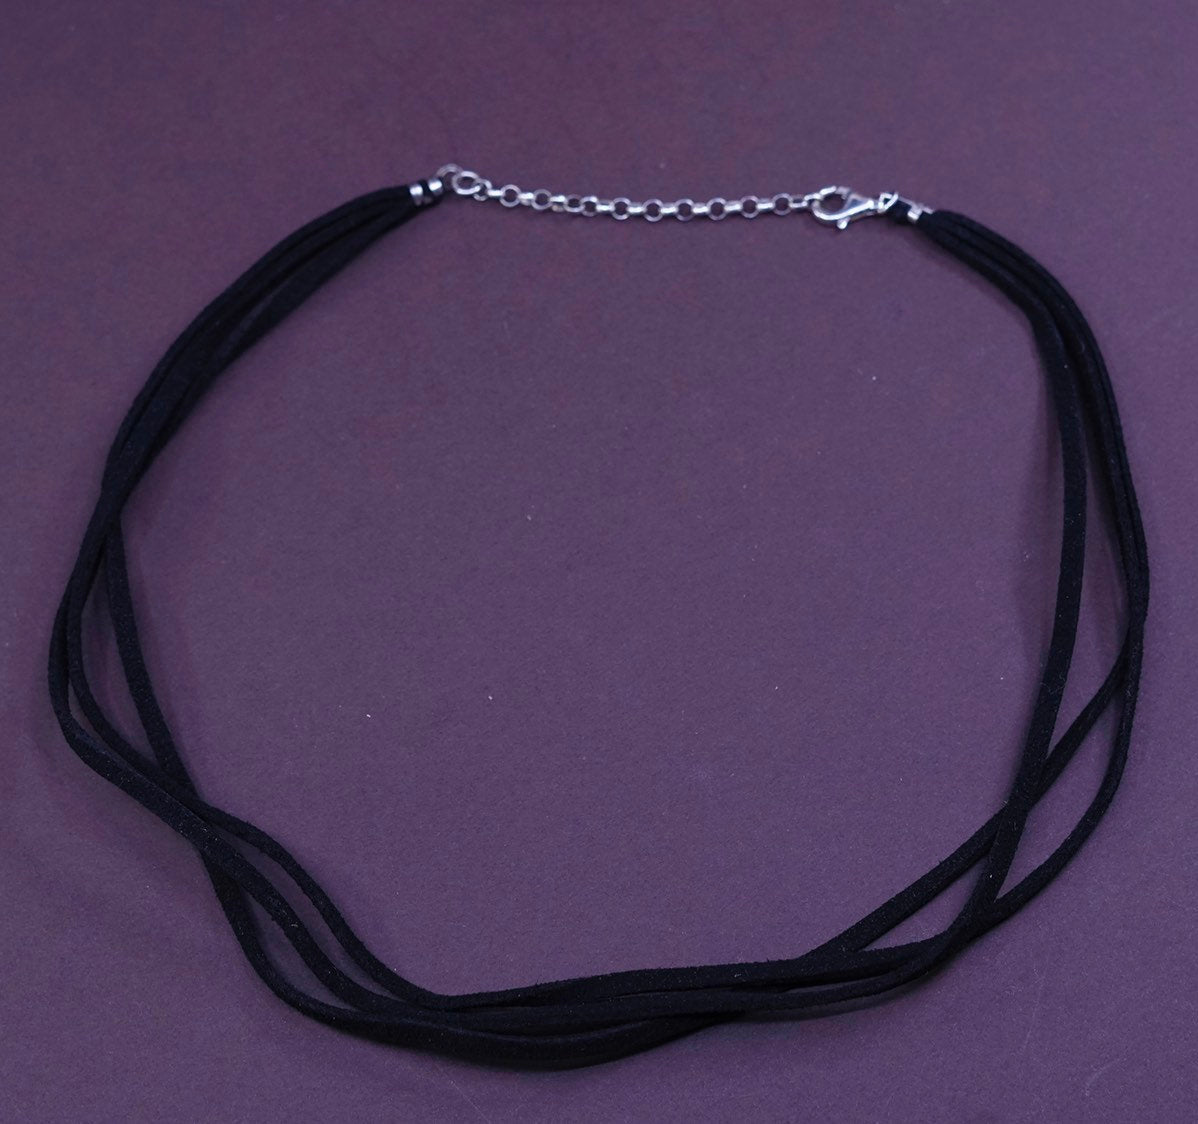 16+2”, handmade necklace, 3 thread choker w/ sterling silver clasp N extension